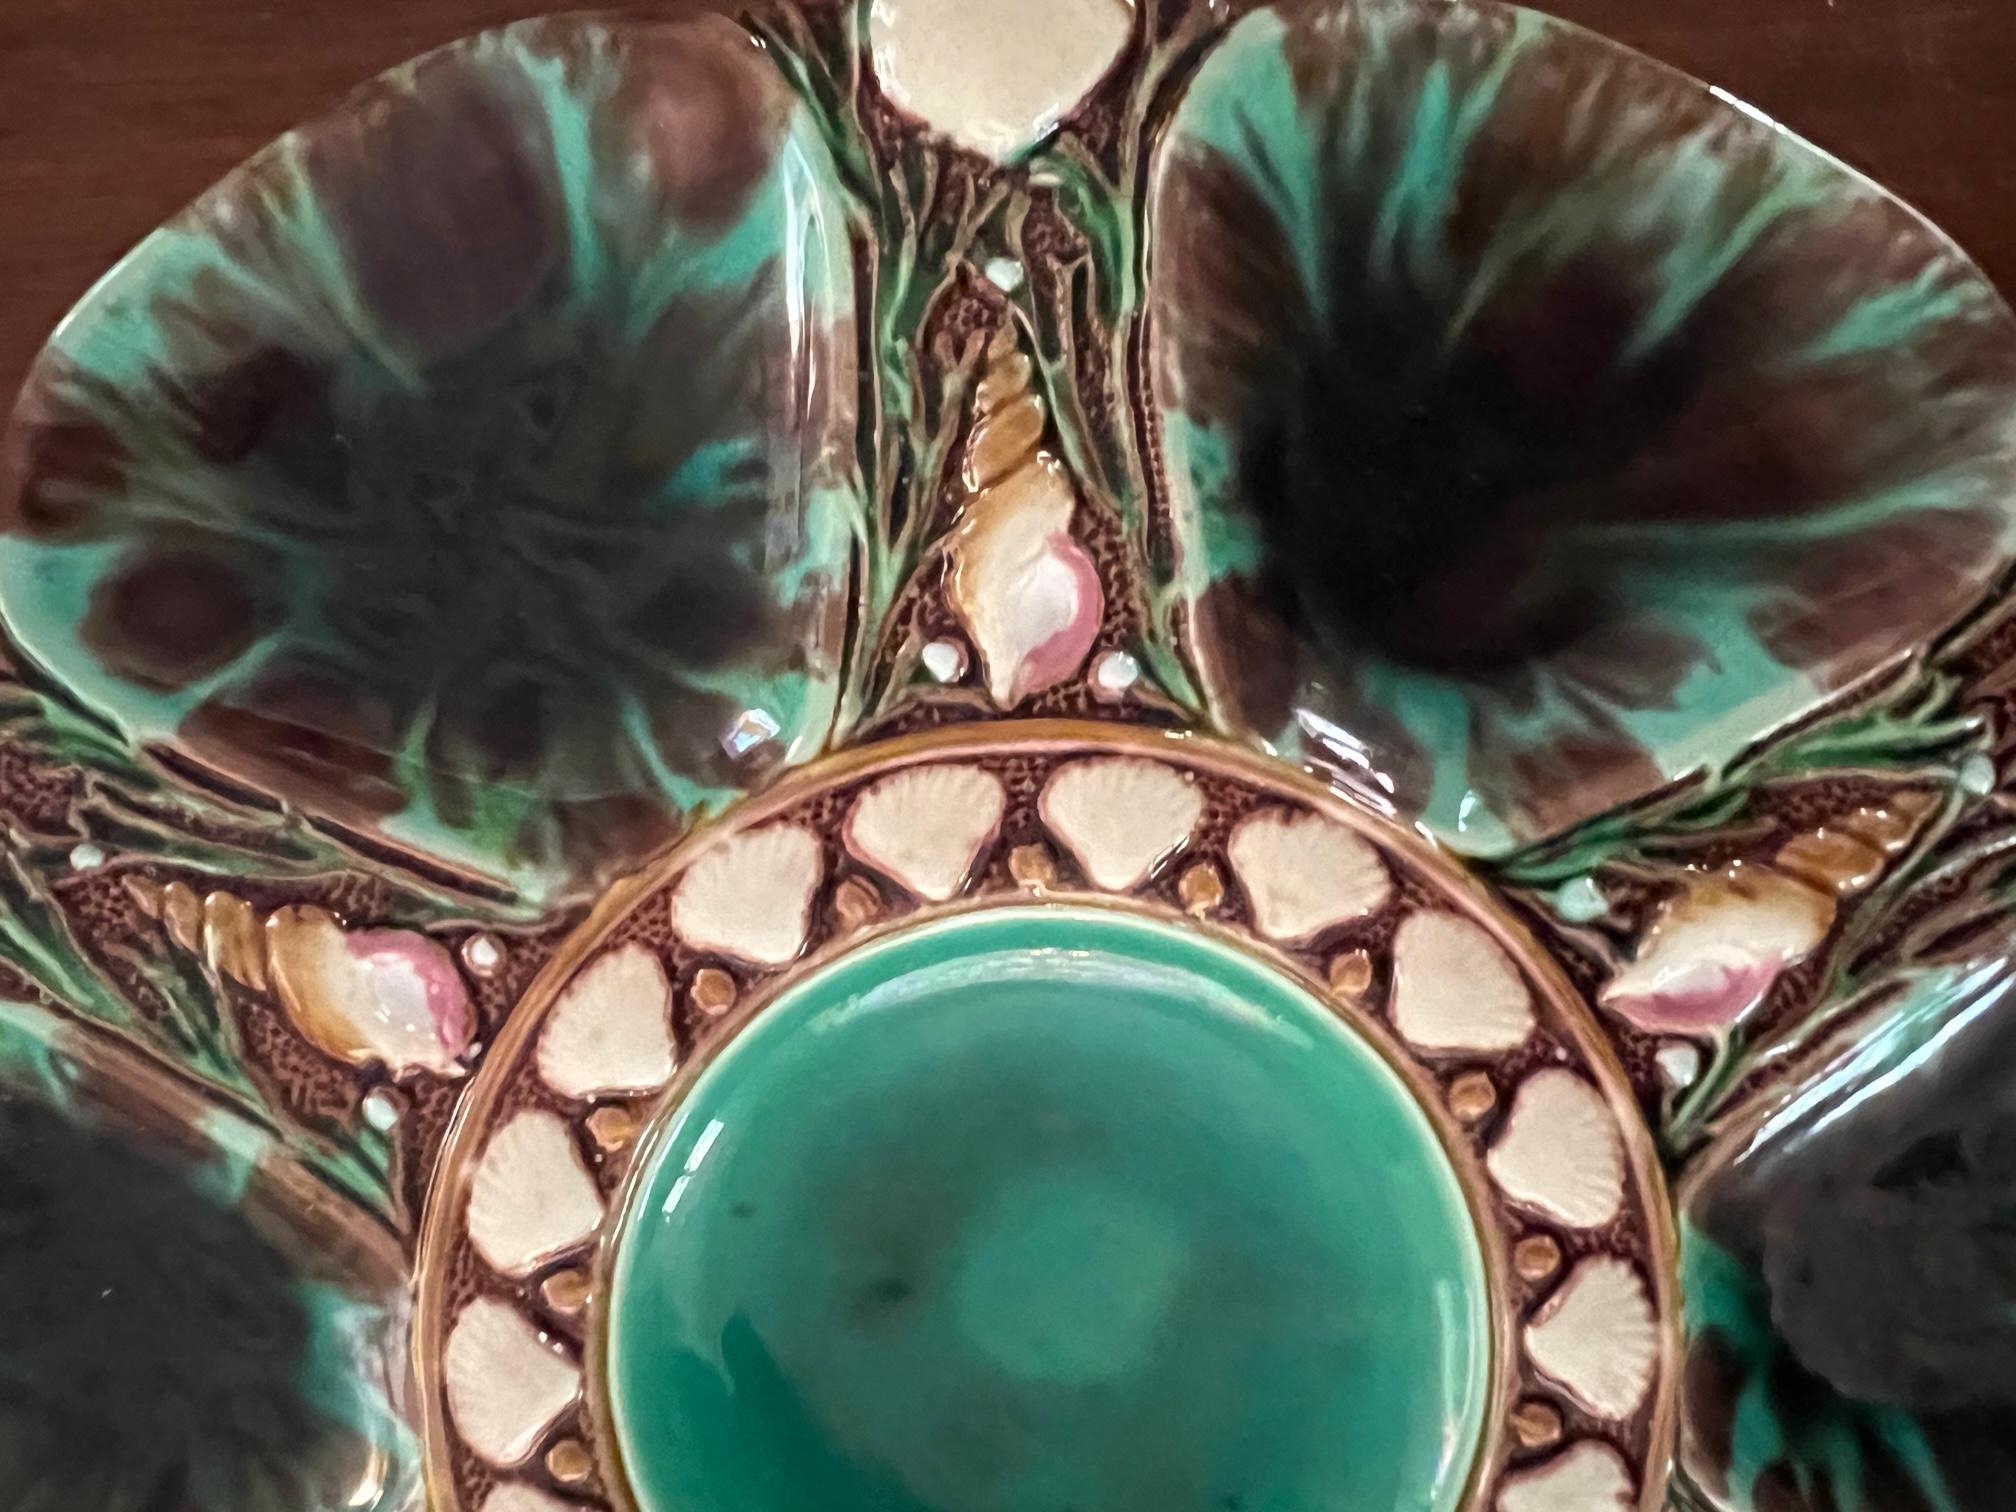 Antique Minton Green Majolica Oyster Plate, circa 1860's-1870's For Sale 5